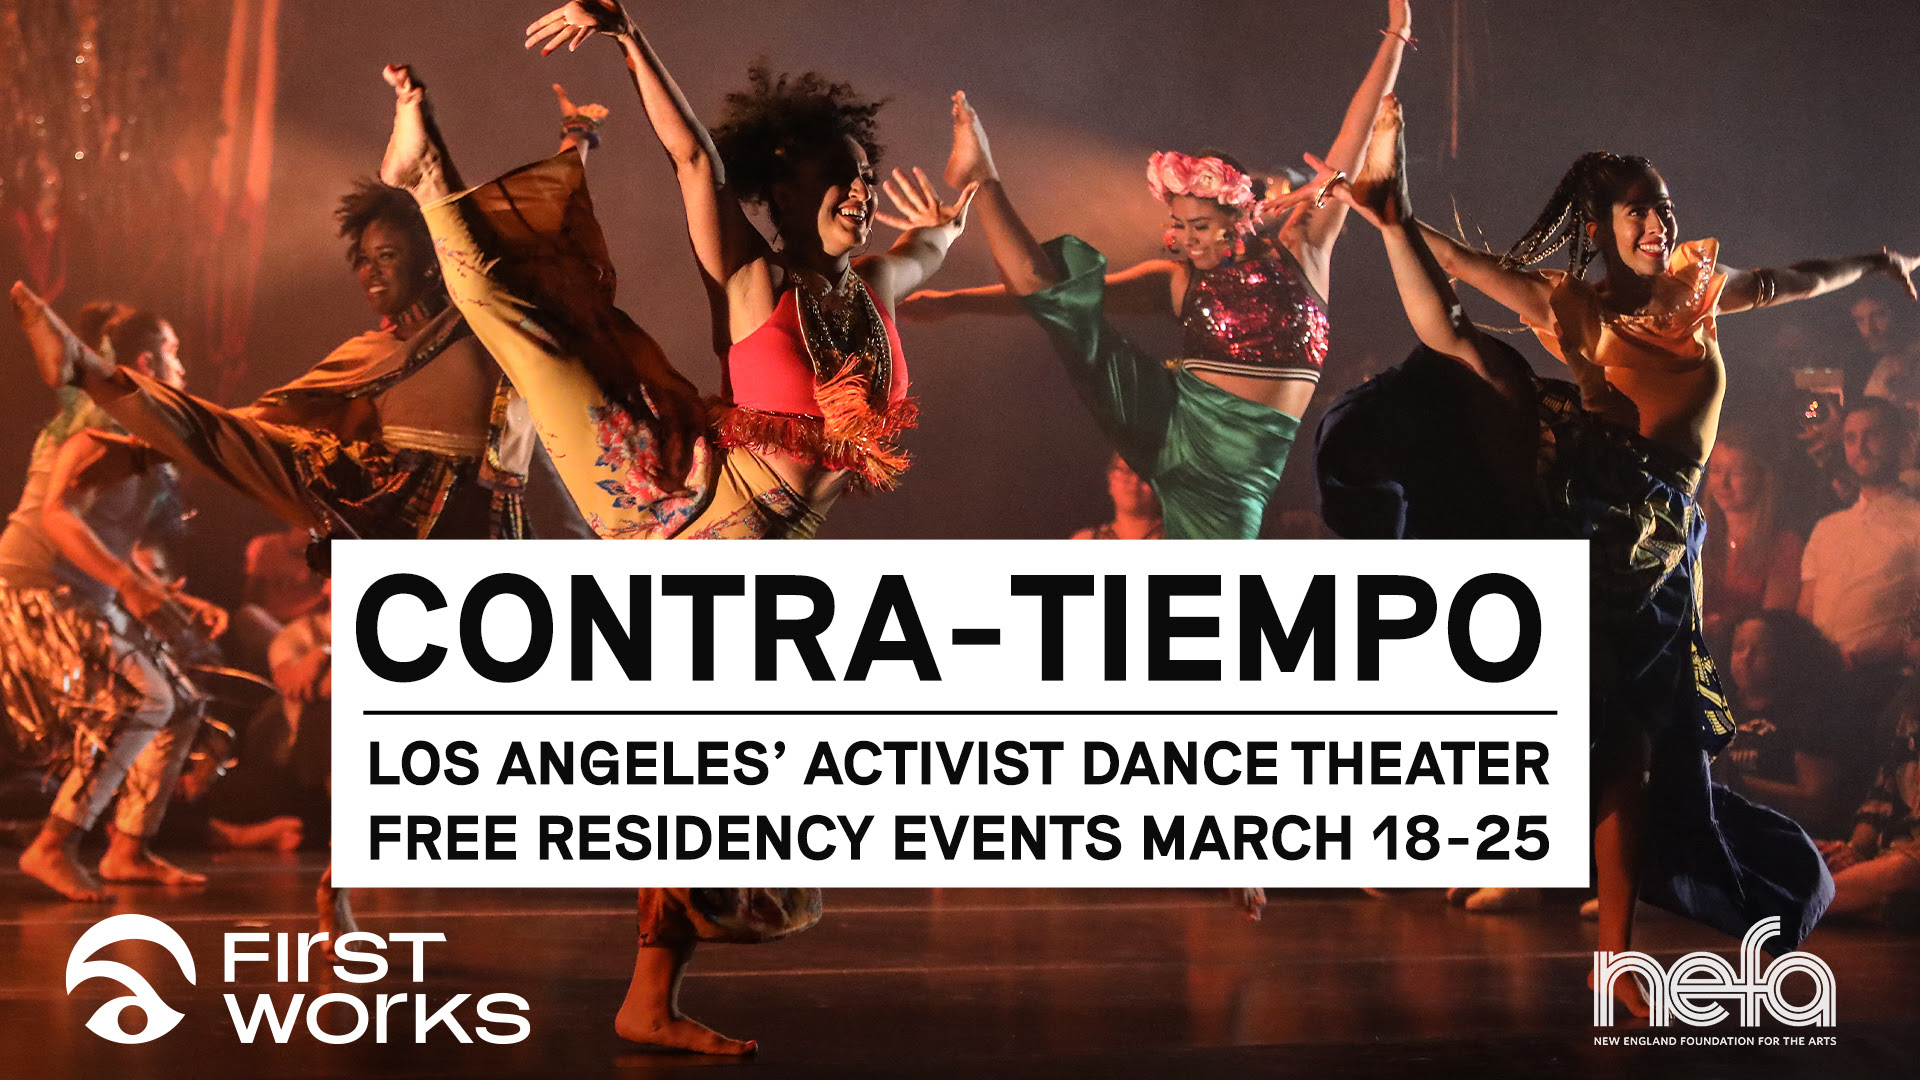 CONTRA-TIEMPO Los Angeles' Activist Dance Theater Free residency events March 18-25